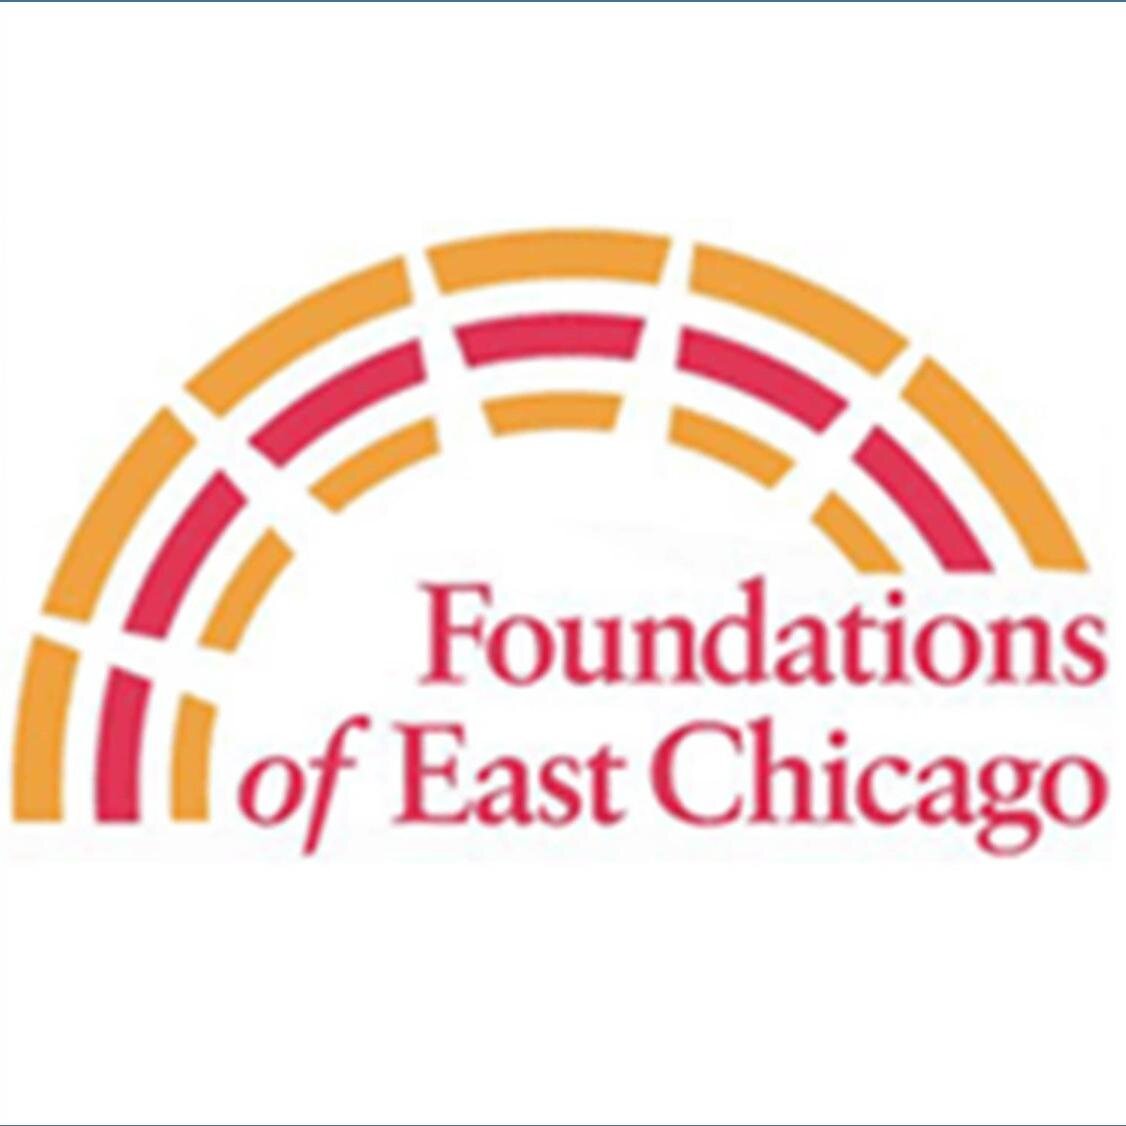 The Foundations of East Chicago is a philanthropic organization dedicated to helping strengthen and improve the quality of life in East Chicago.